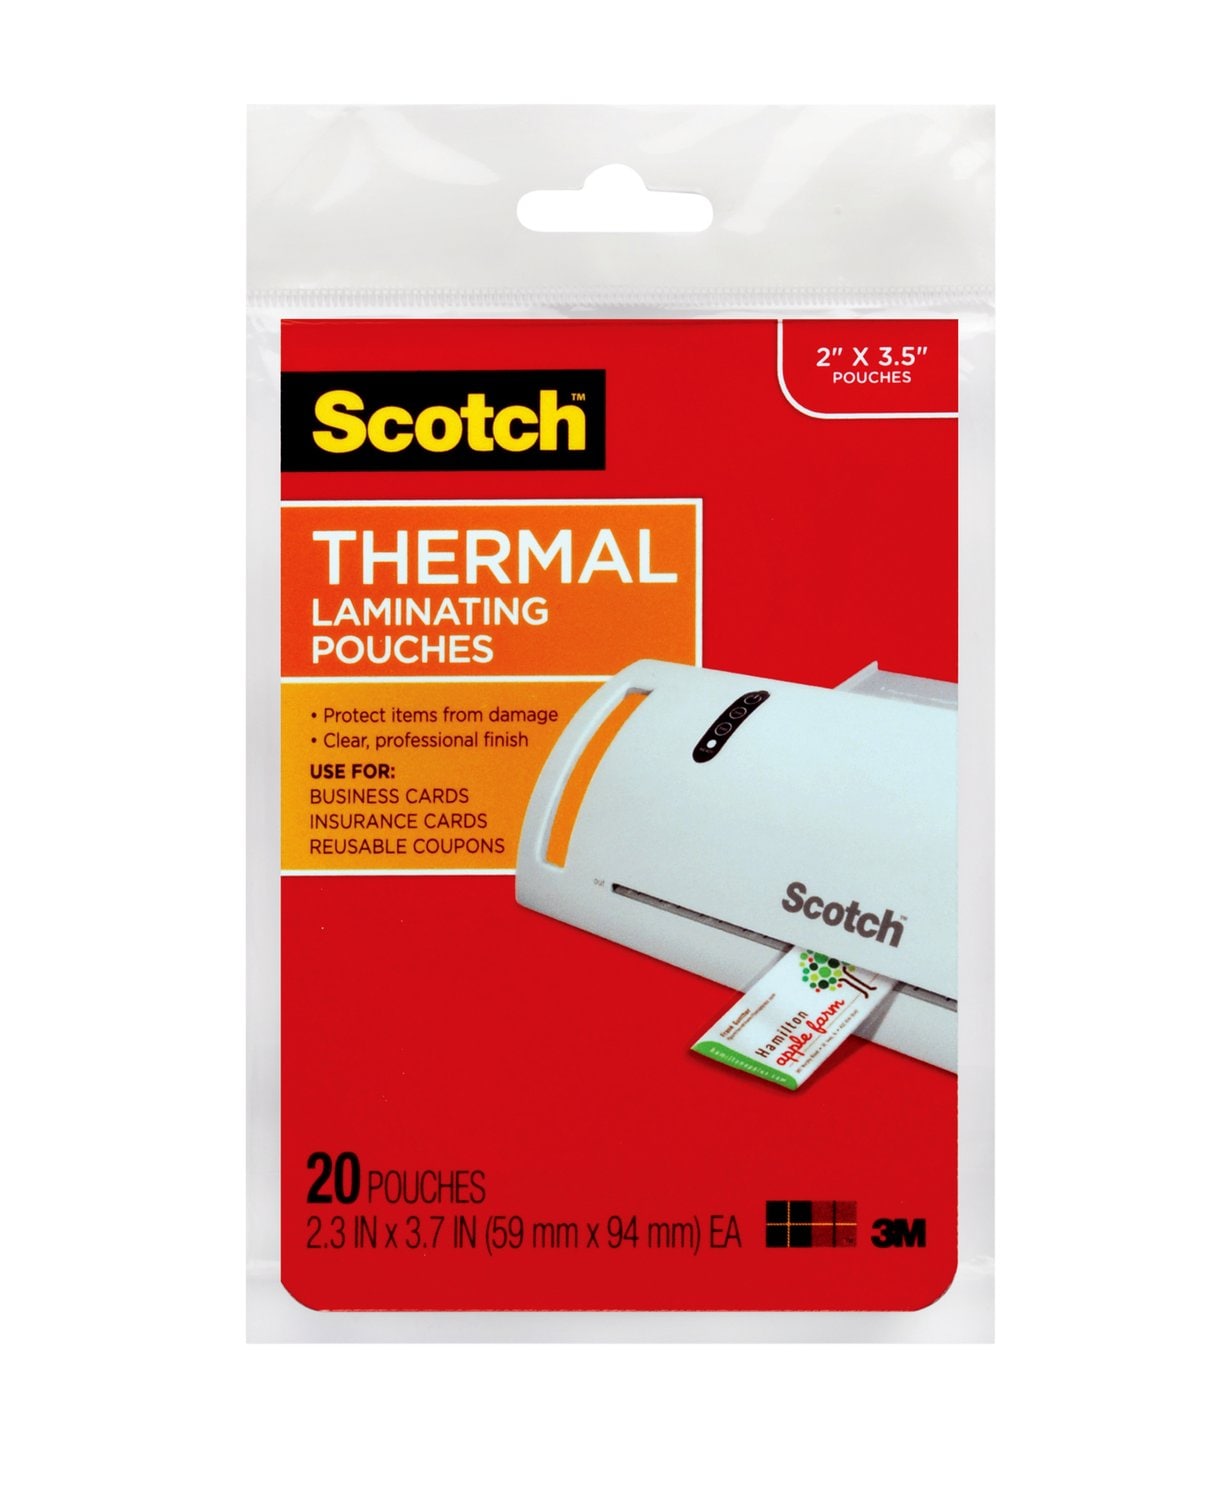 7010369851 - Scotch Thermal Pouches TP5851-20 Business Card 20 pack